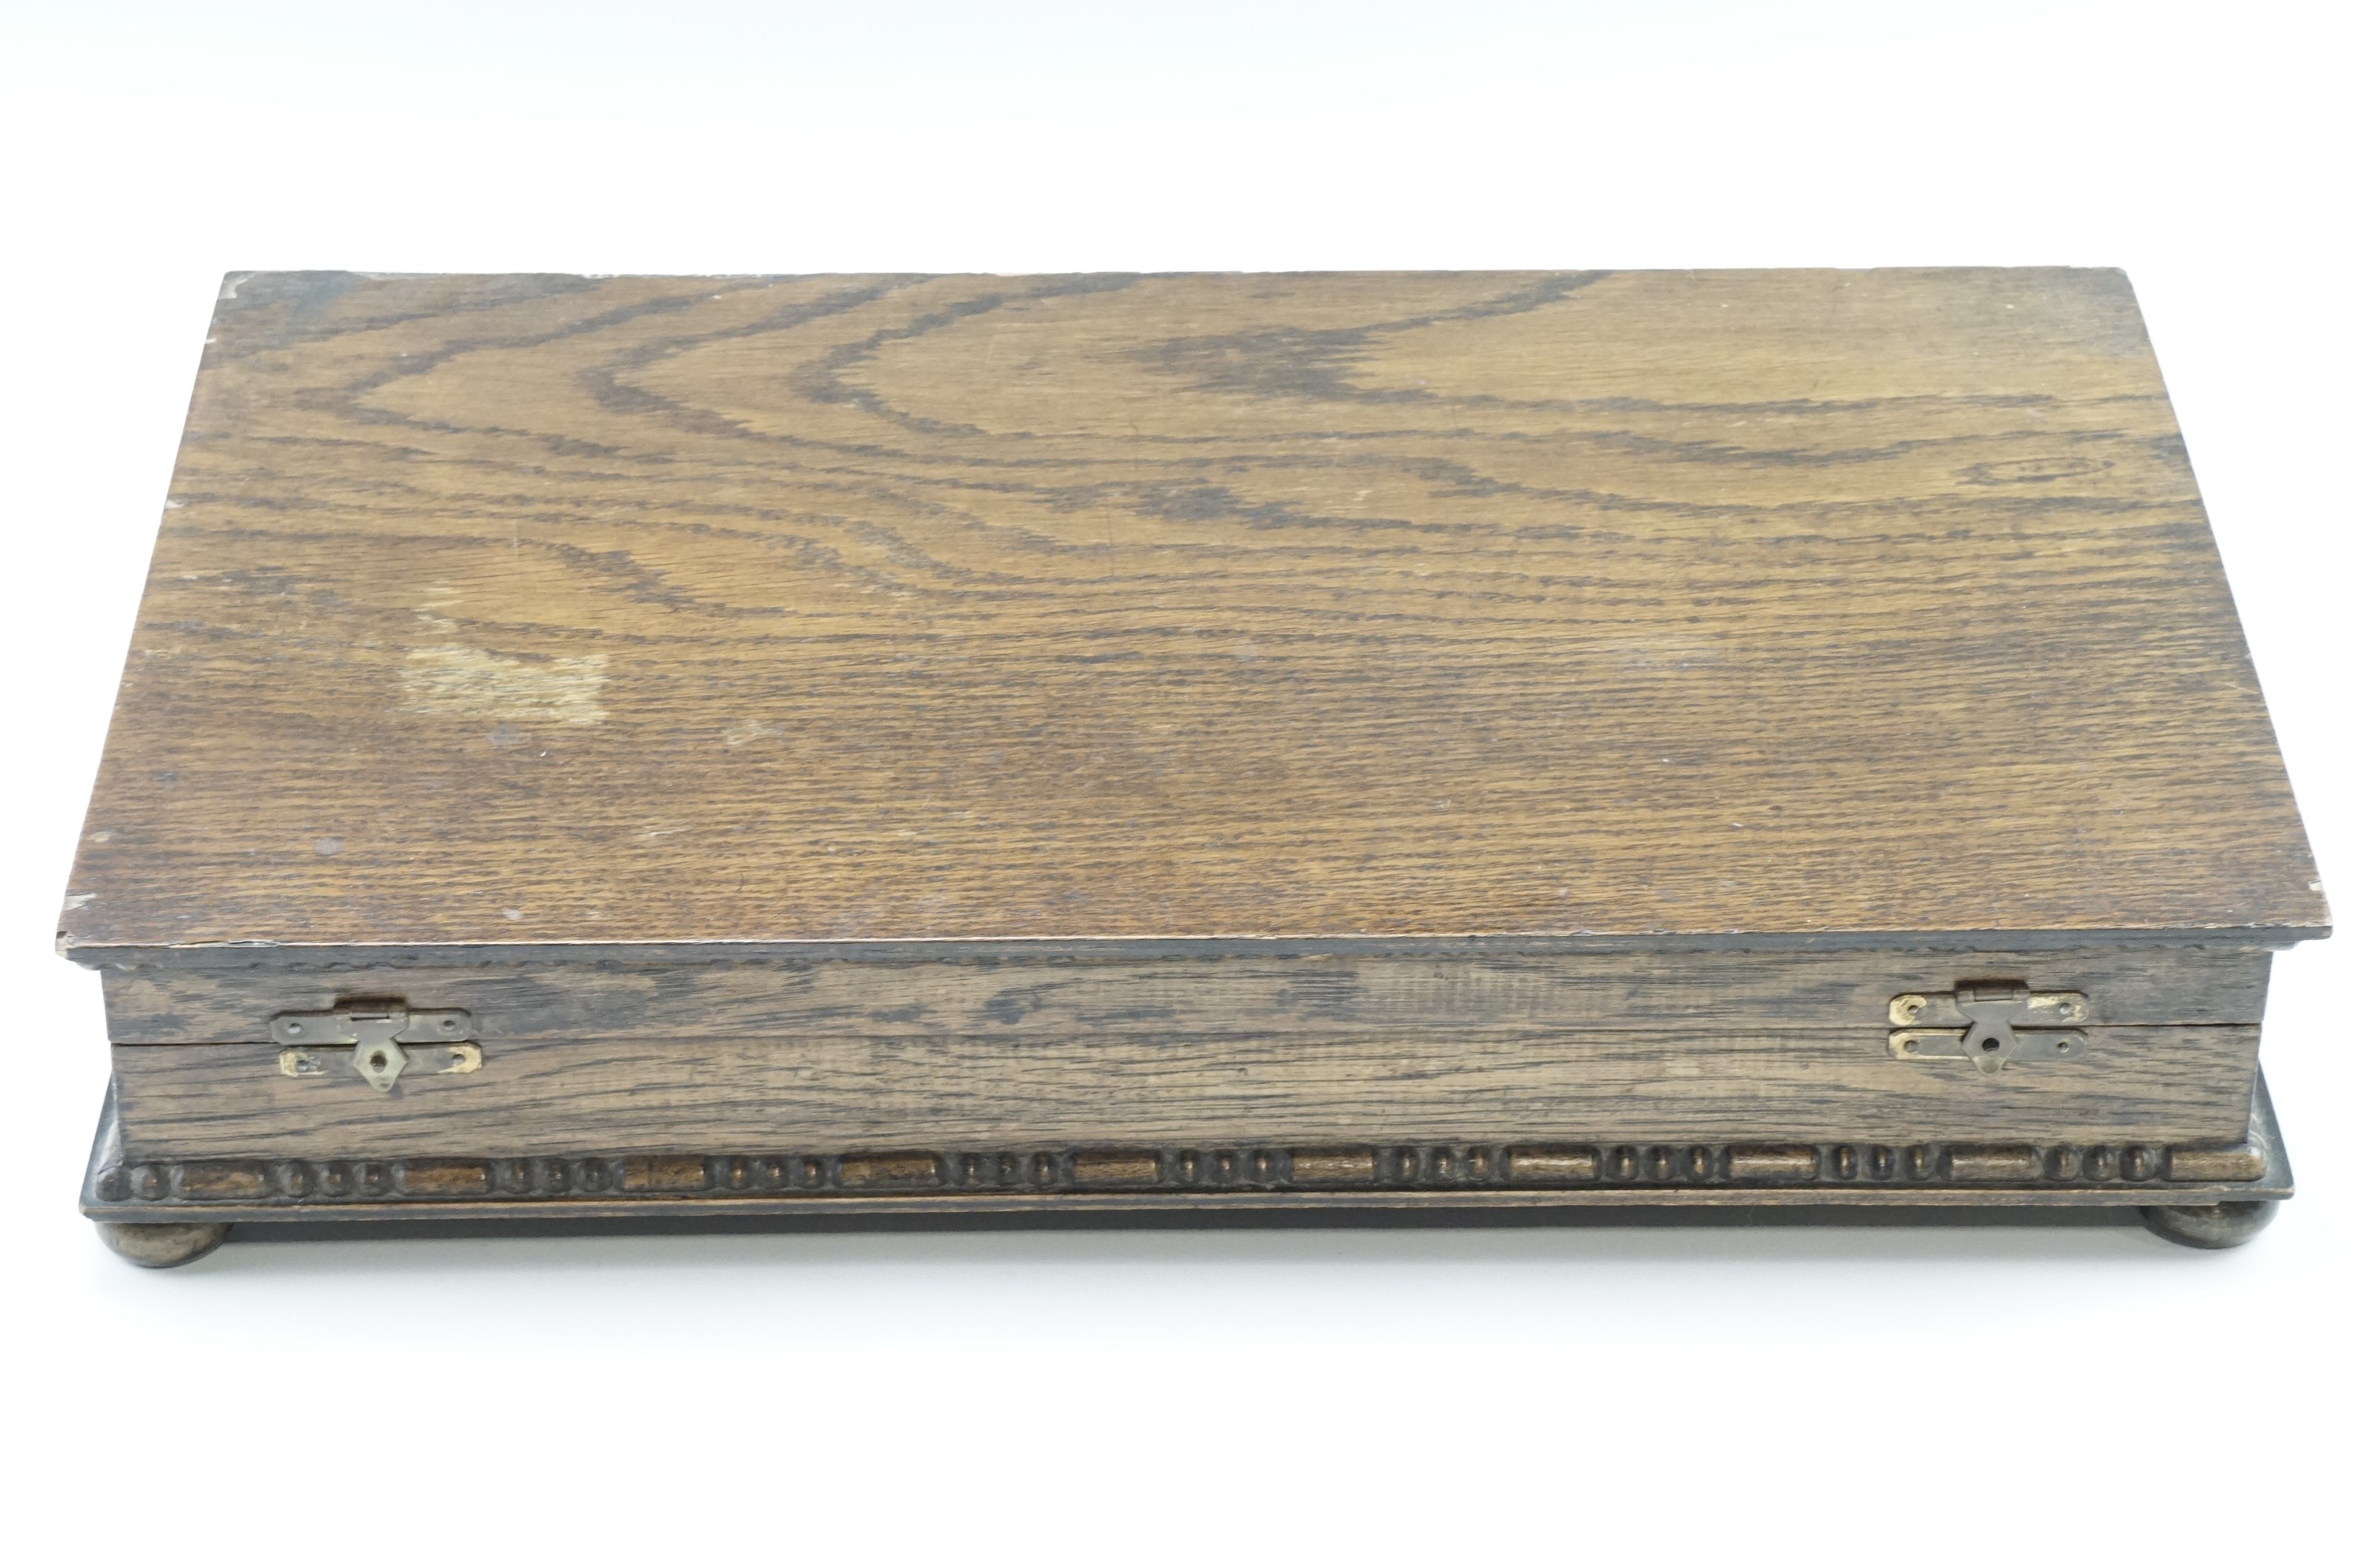 A 1930s oak veneered canteen of electroplated cutlery, 47 x 28 x 9 cm - Image 2 of 2